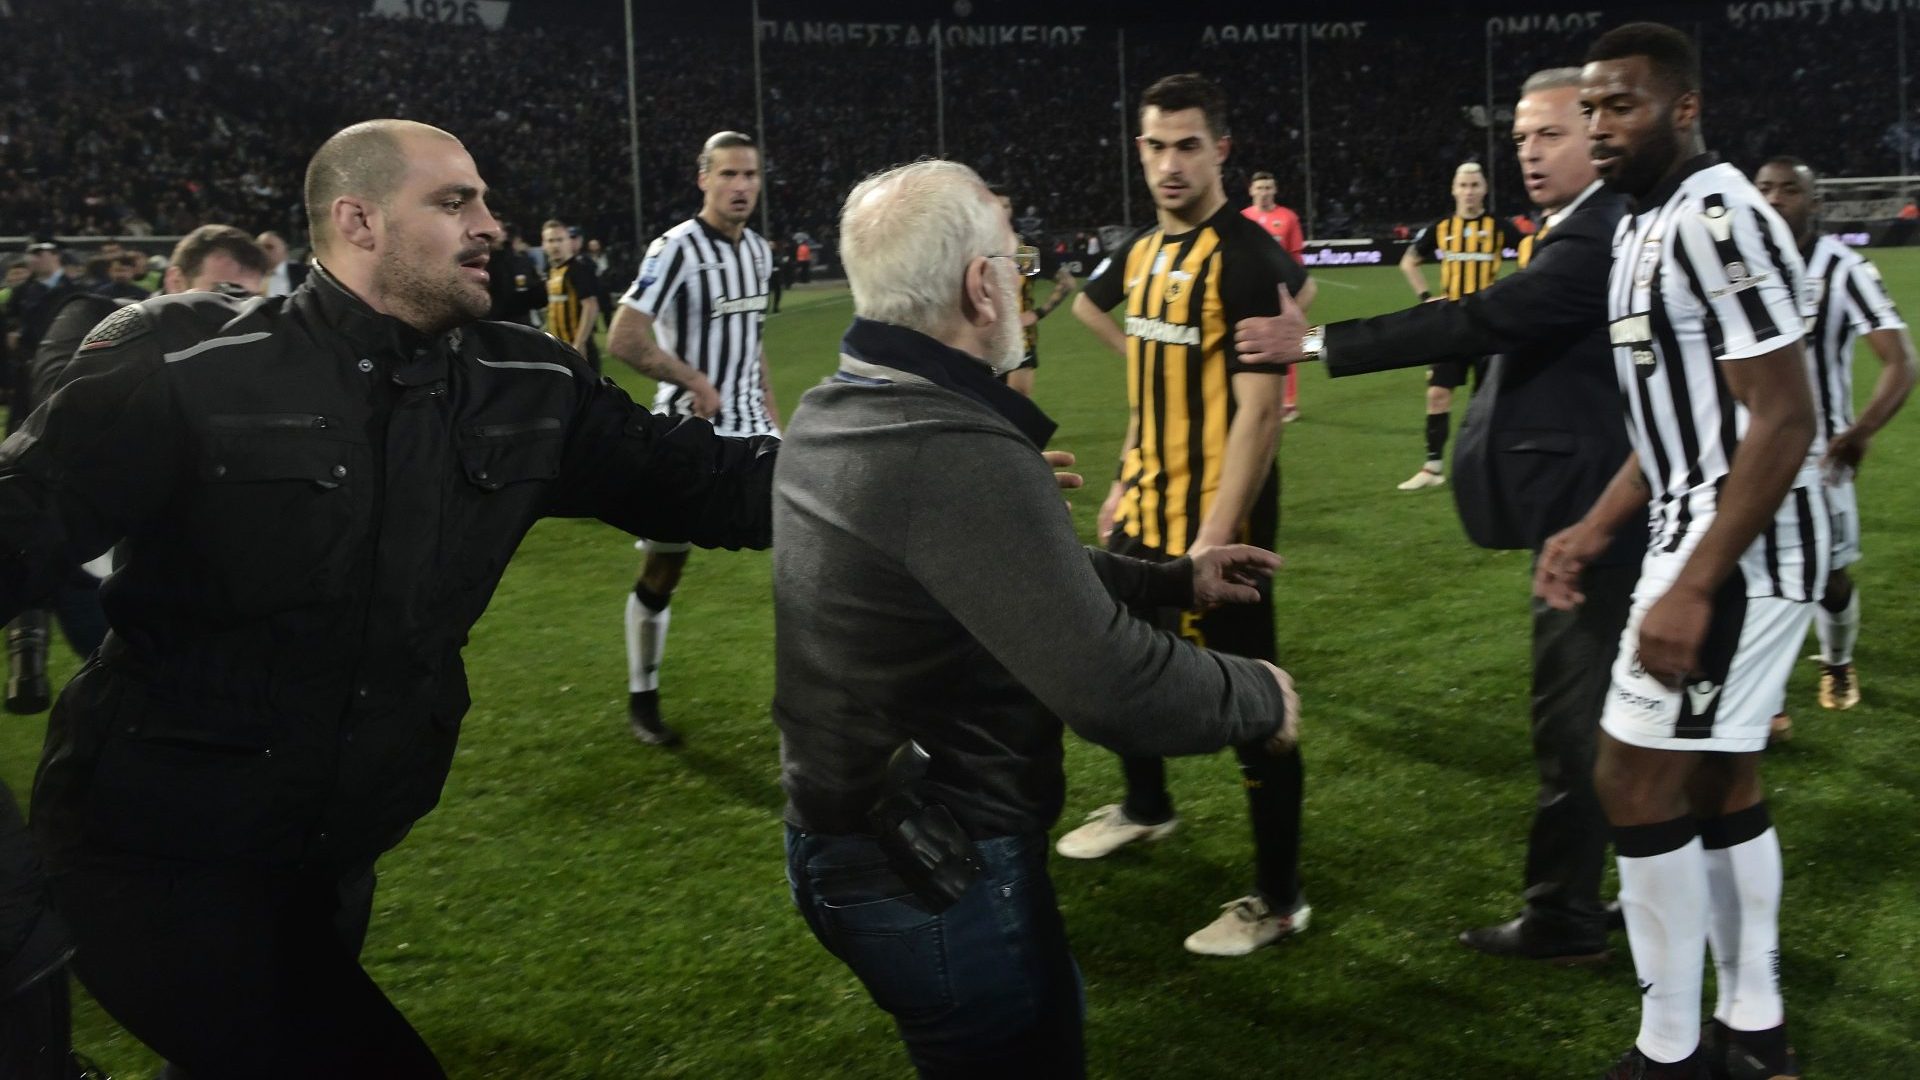 Ivan Savvidis (centre) goes on to the pitch carrying a handgun in his waistband during a match between PAOK Thessaloniki and AEK Athens (Photo: AFP/Getty)